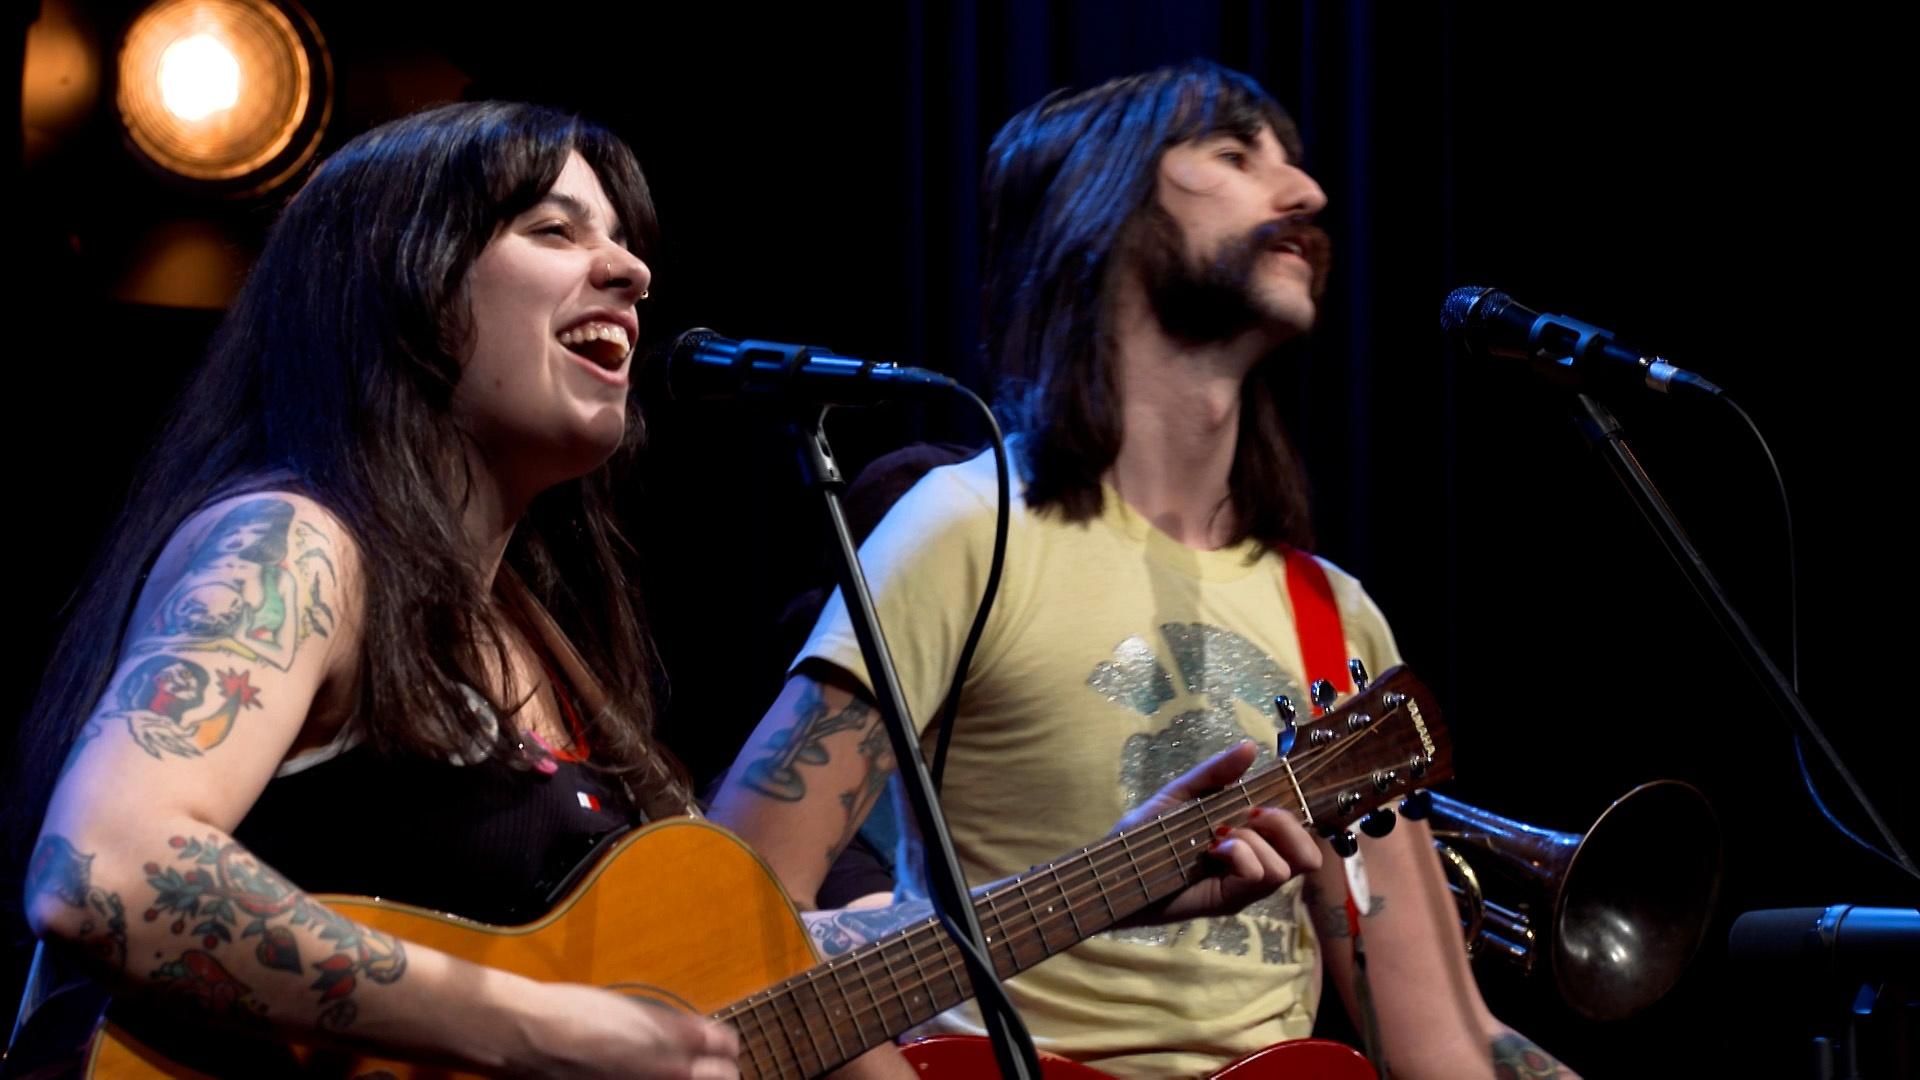 Woman playing guitar and singing into a microphone next to a man playing guitar.